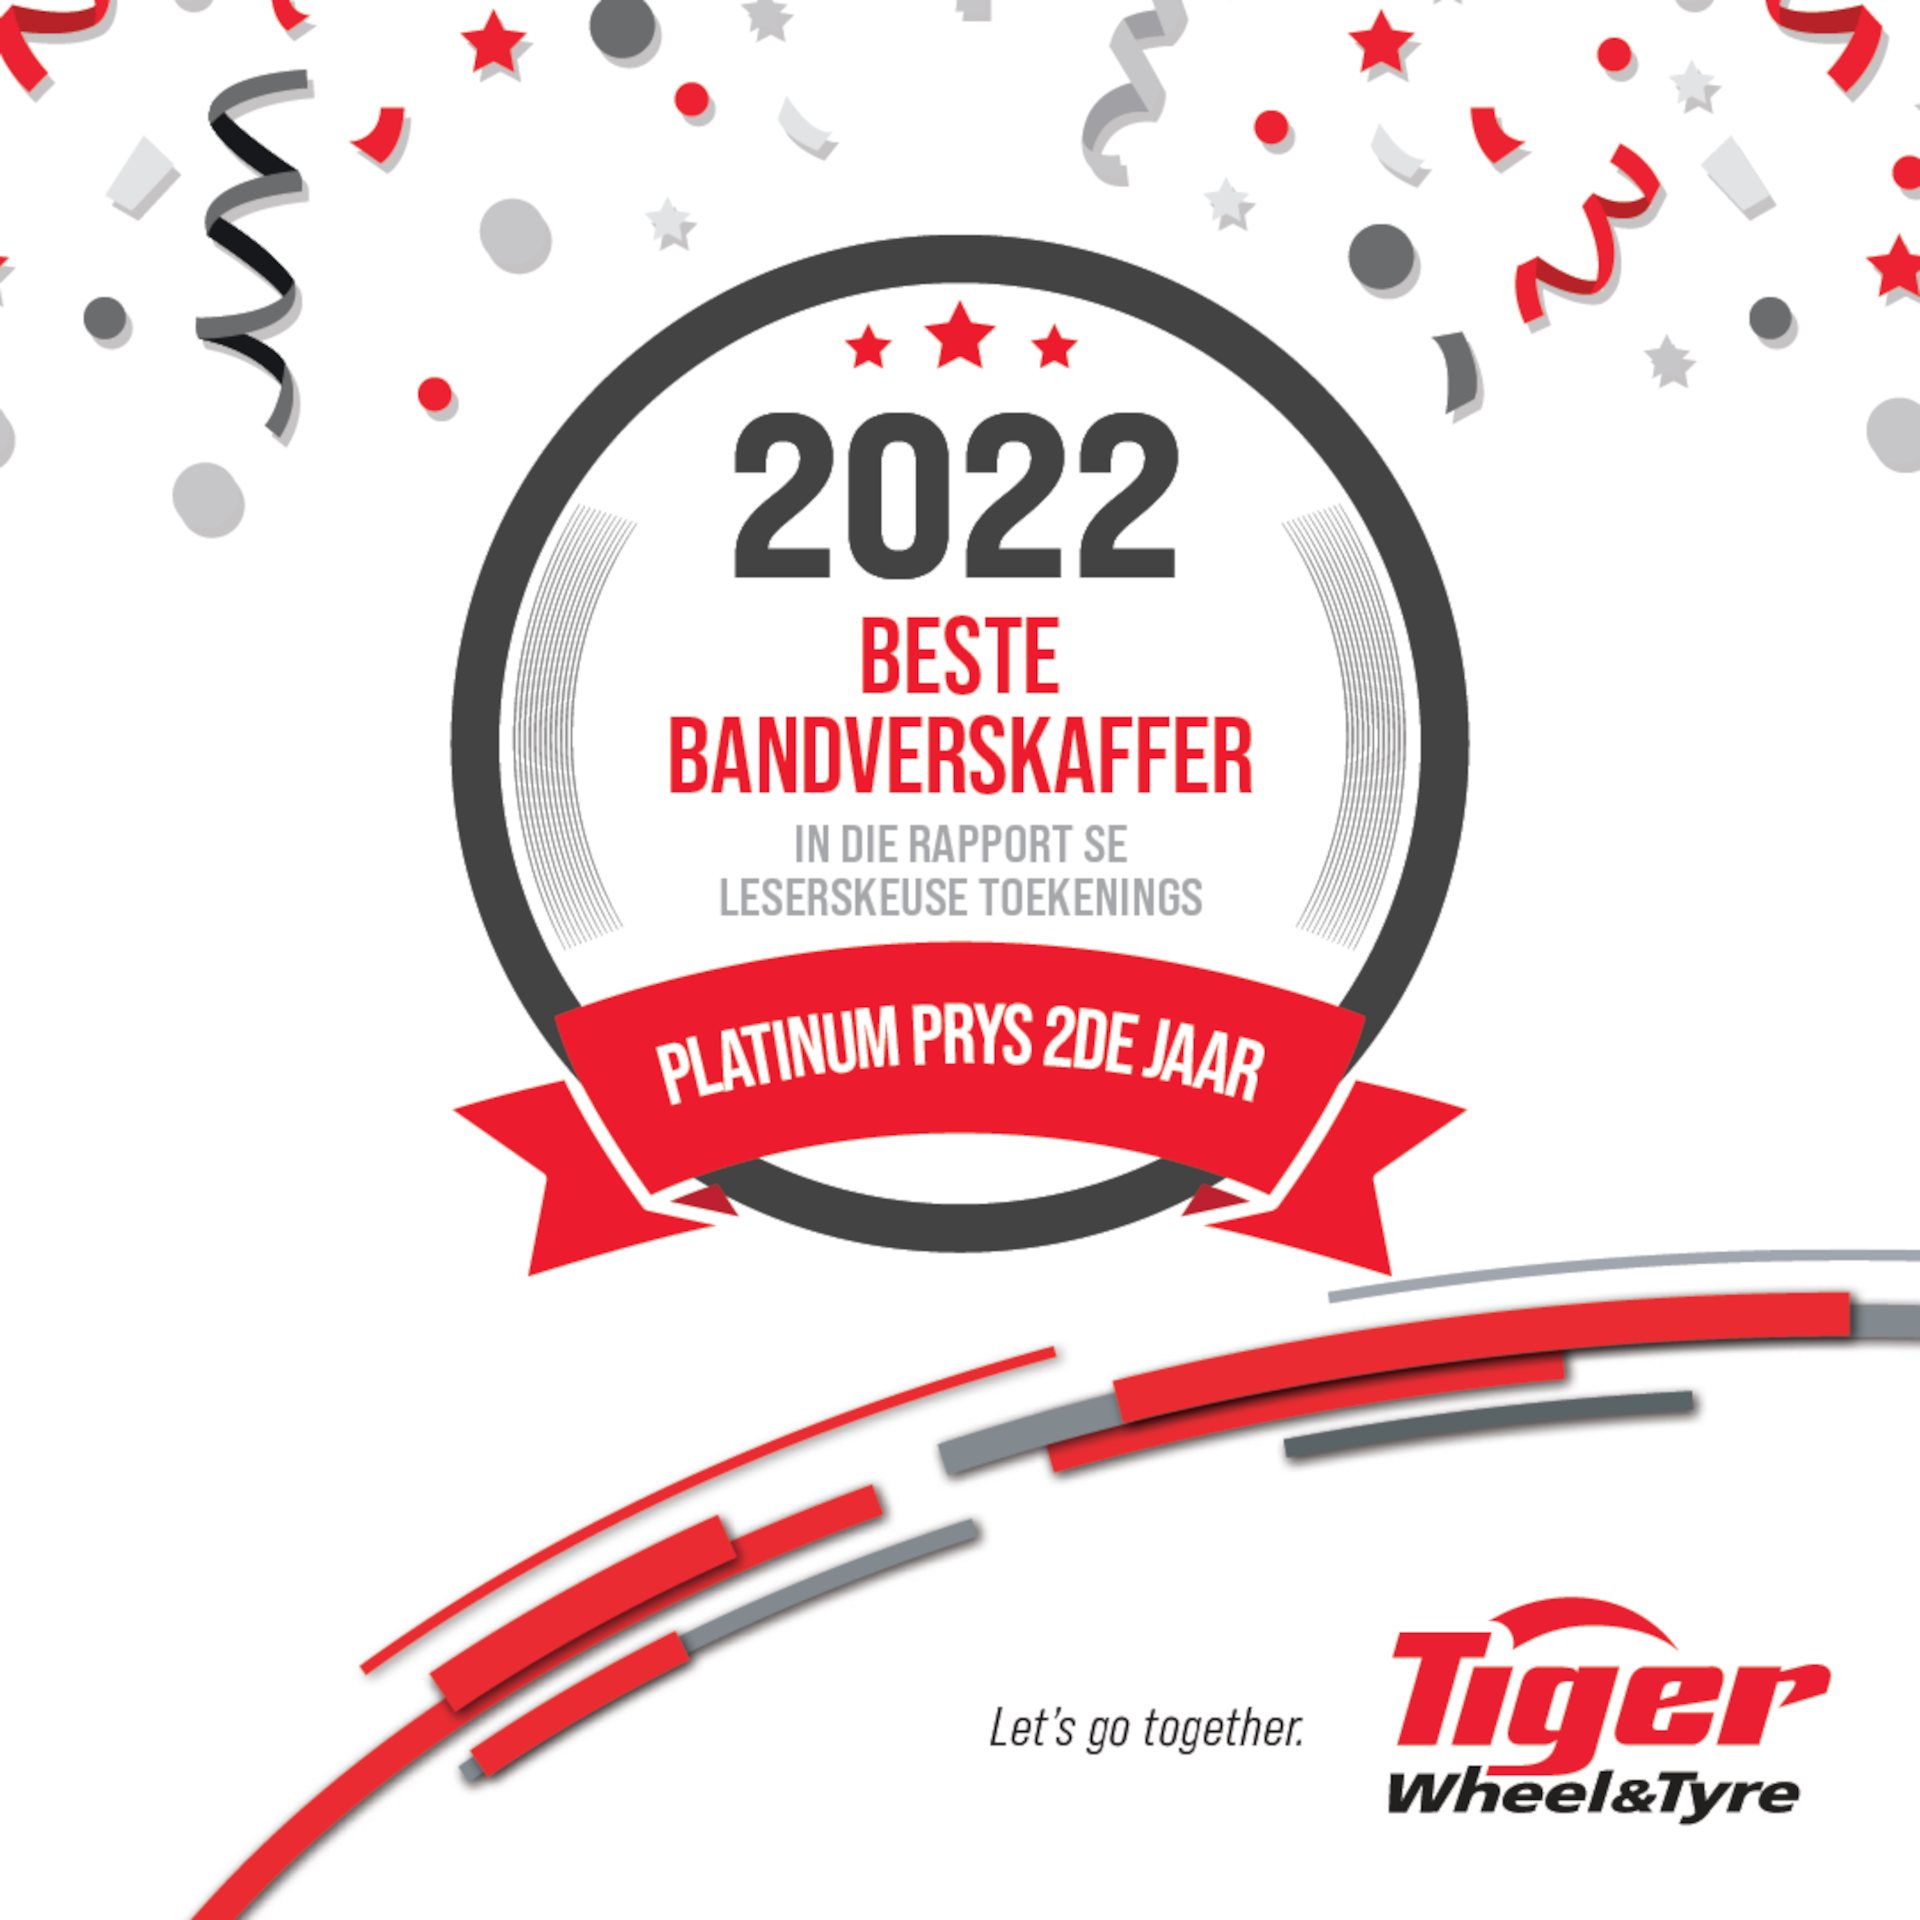 RAPPORT READERS’ CHOICE AWARDS: TIGER WHEEL & TYRE MAINTAIN PLATINUM PLACE